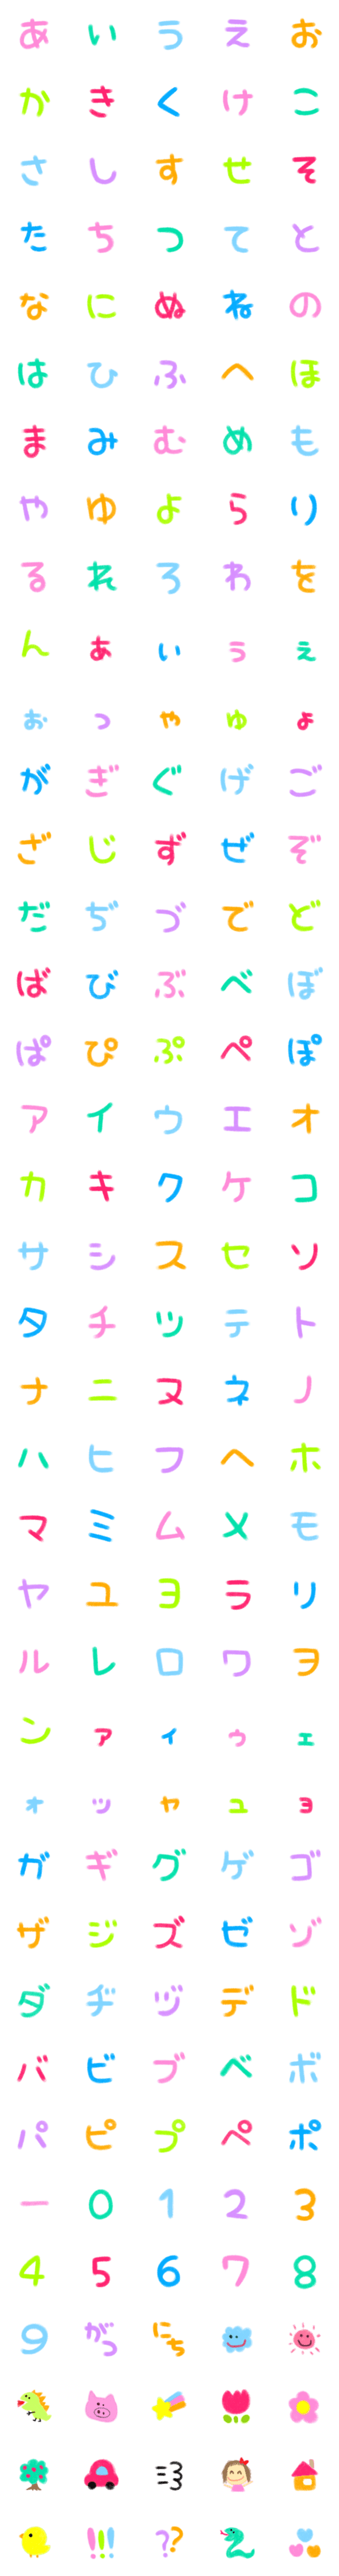 [LINE絵文字]ゆるっと絵日記【デコ文字＆絵文字セット】の画像一覧